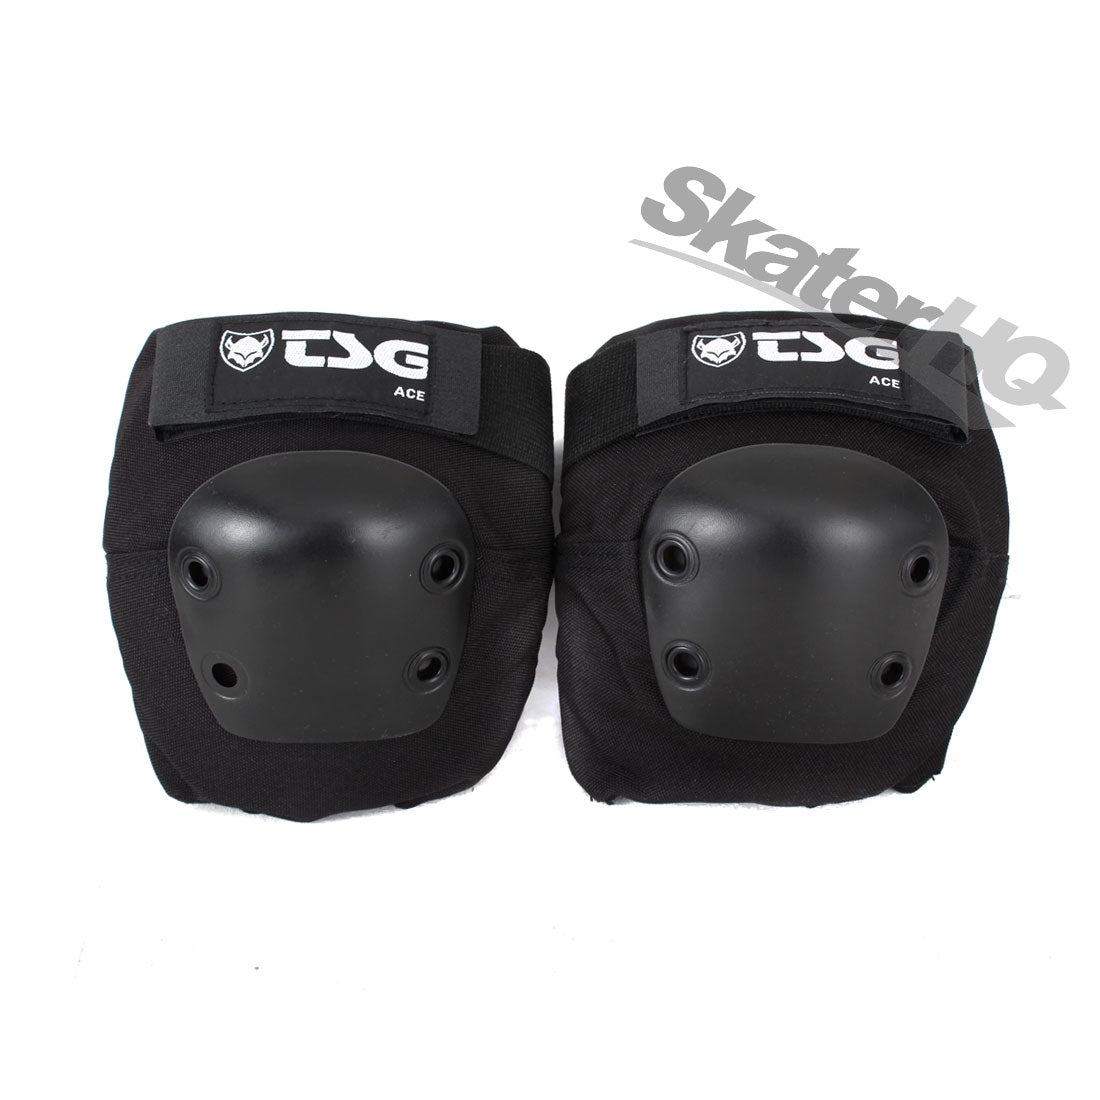 TSG Elbow Ace Pads - Small Protective Gear